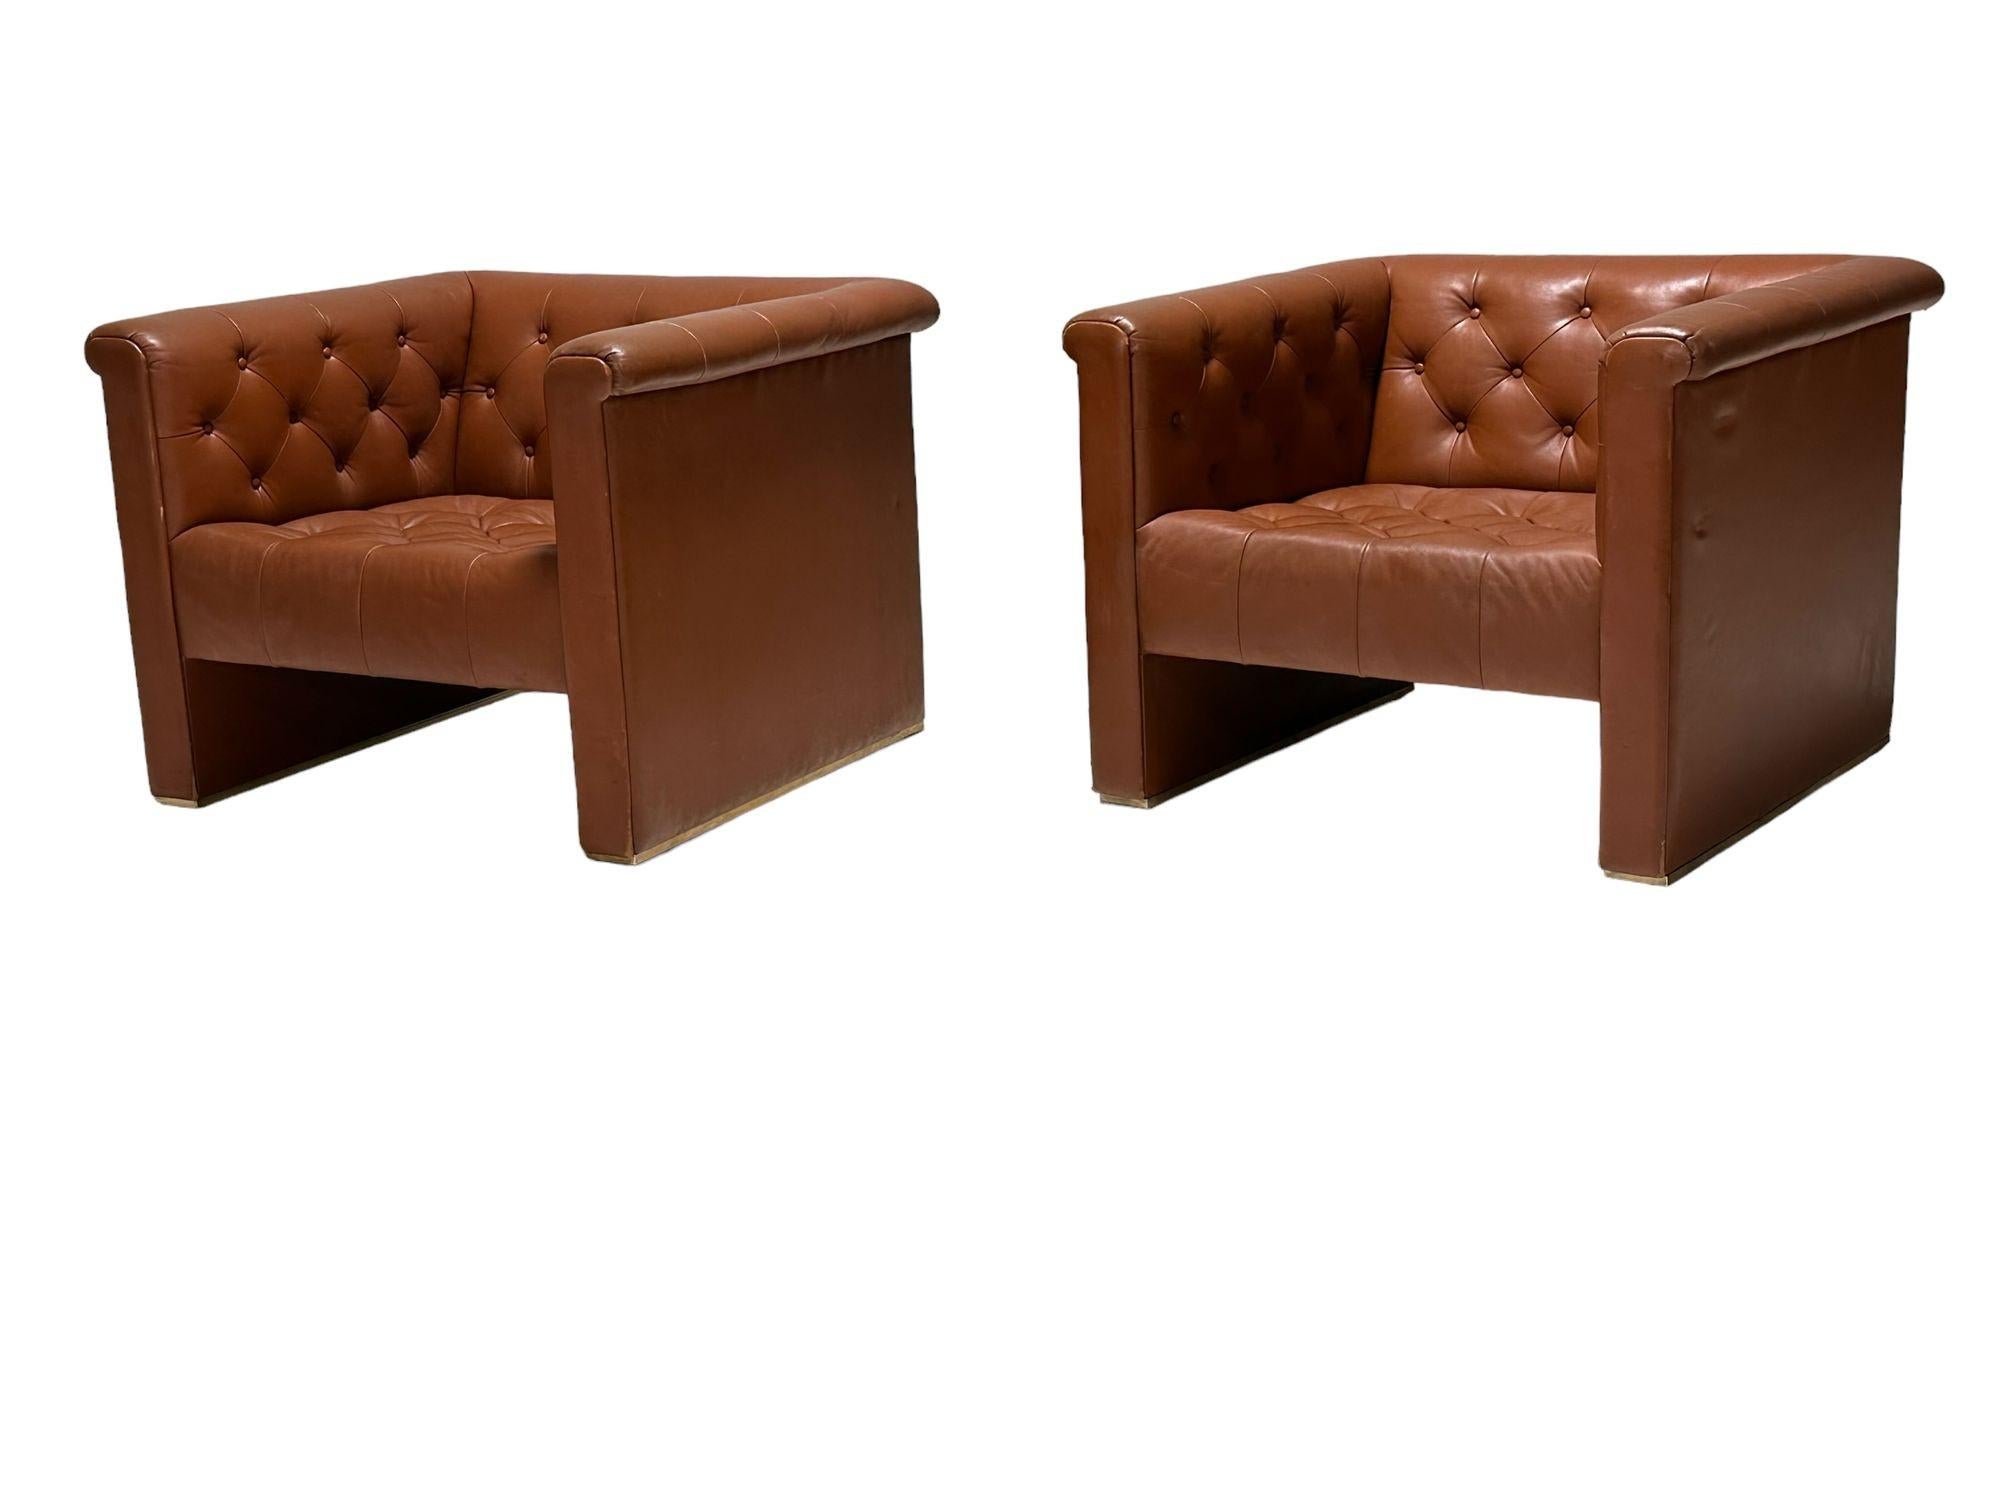 Pair tufted cube leather club chairs, 1970. Original leather.